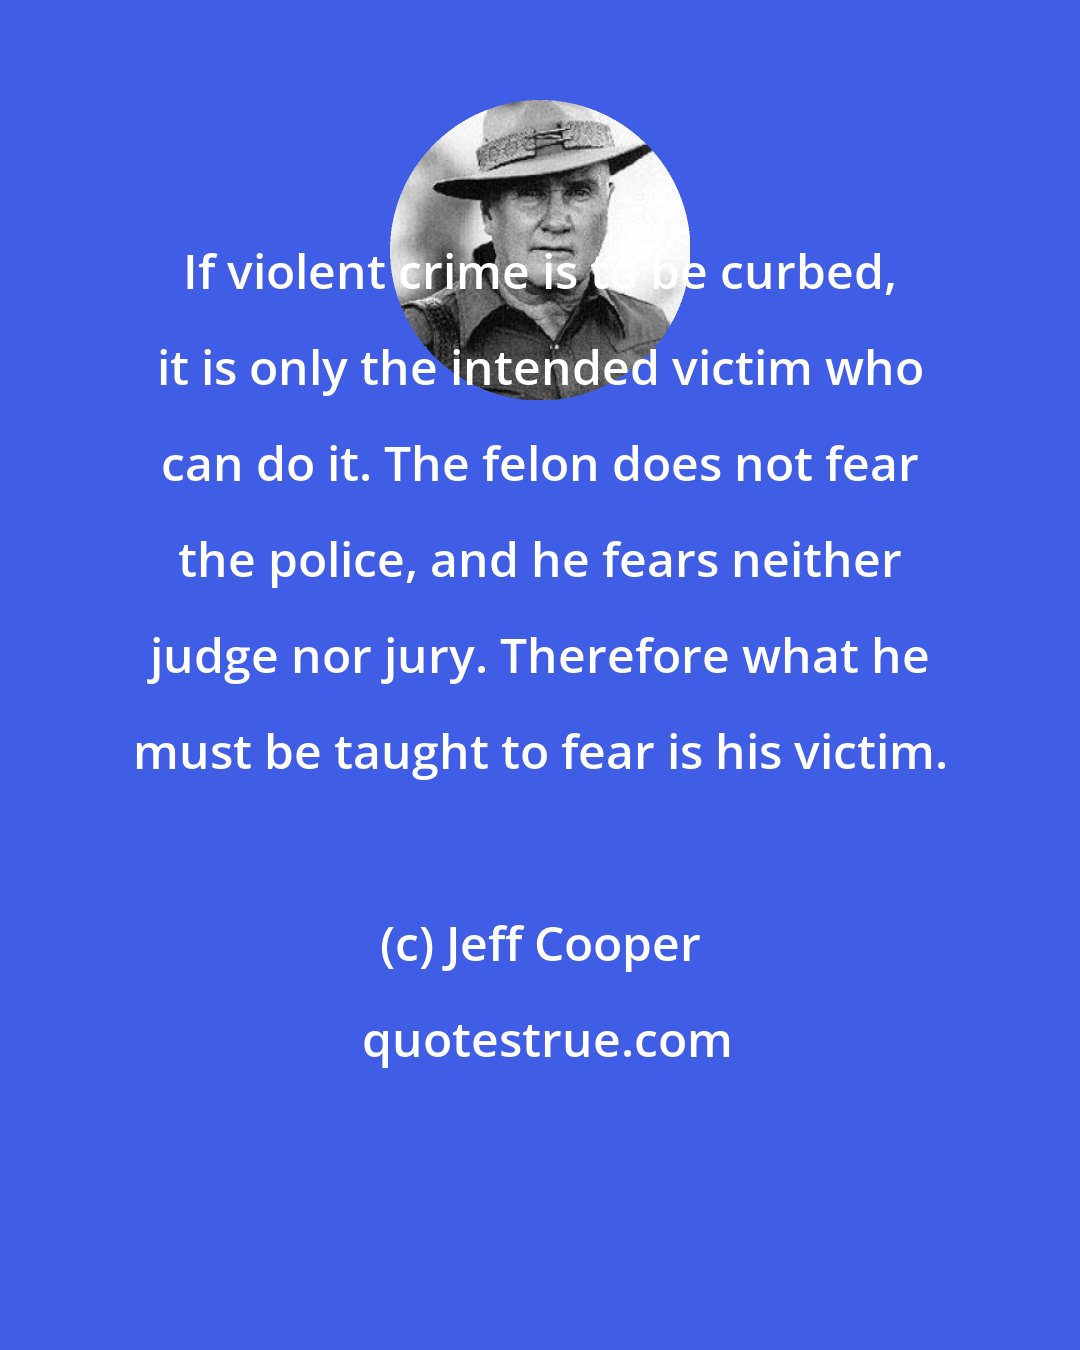 Jeff Cooper: If violent crime is to be curbed, it is only the intended victim who can do it. The felon does not fear the police, and he fears neither judge nor jury. Therefore what he must be taught to fear is his victim.